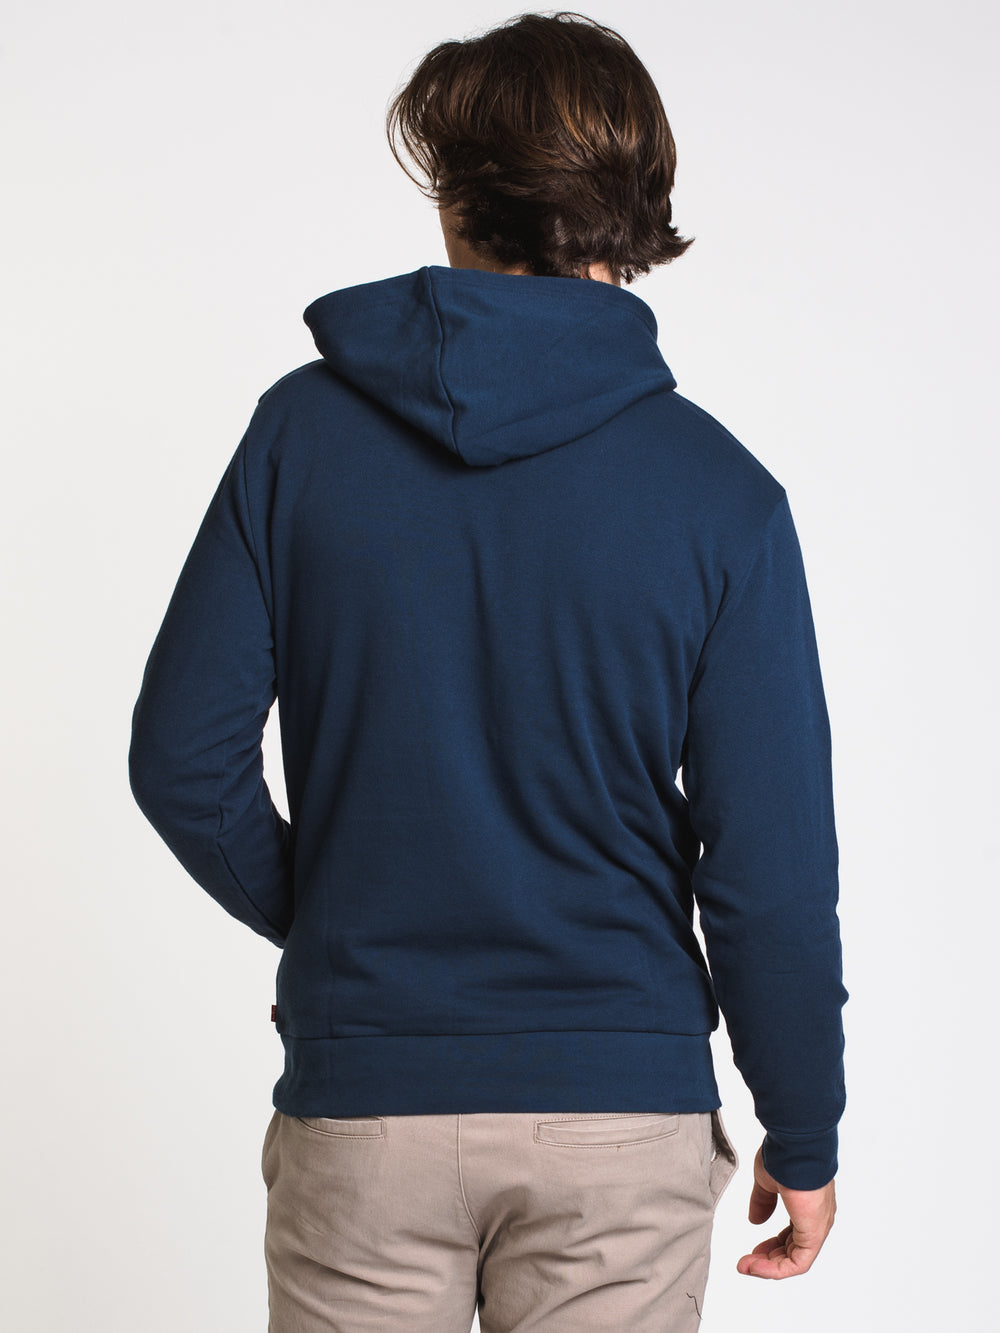 LEVIS GRAPHIC PULLOVER HOODIE - CLEARANCE